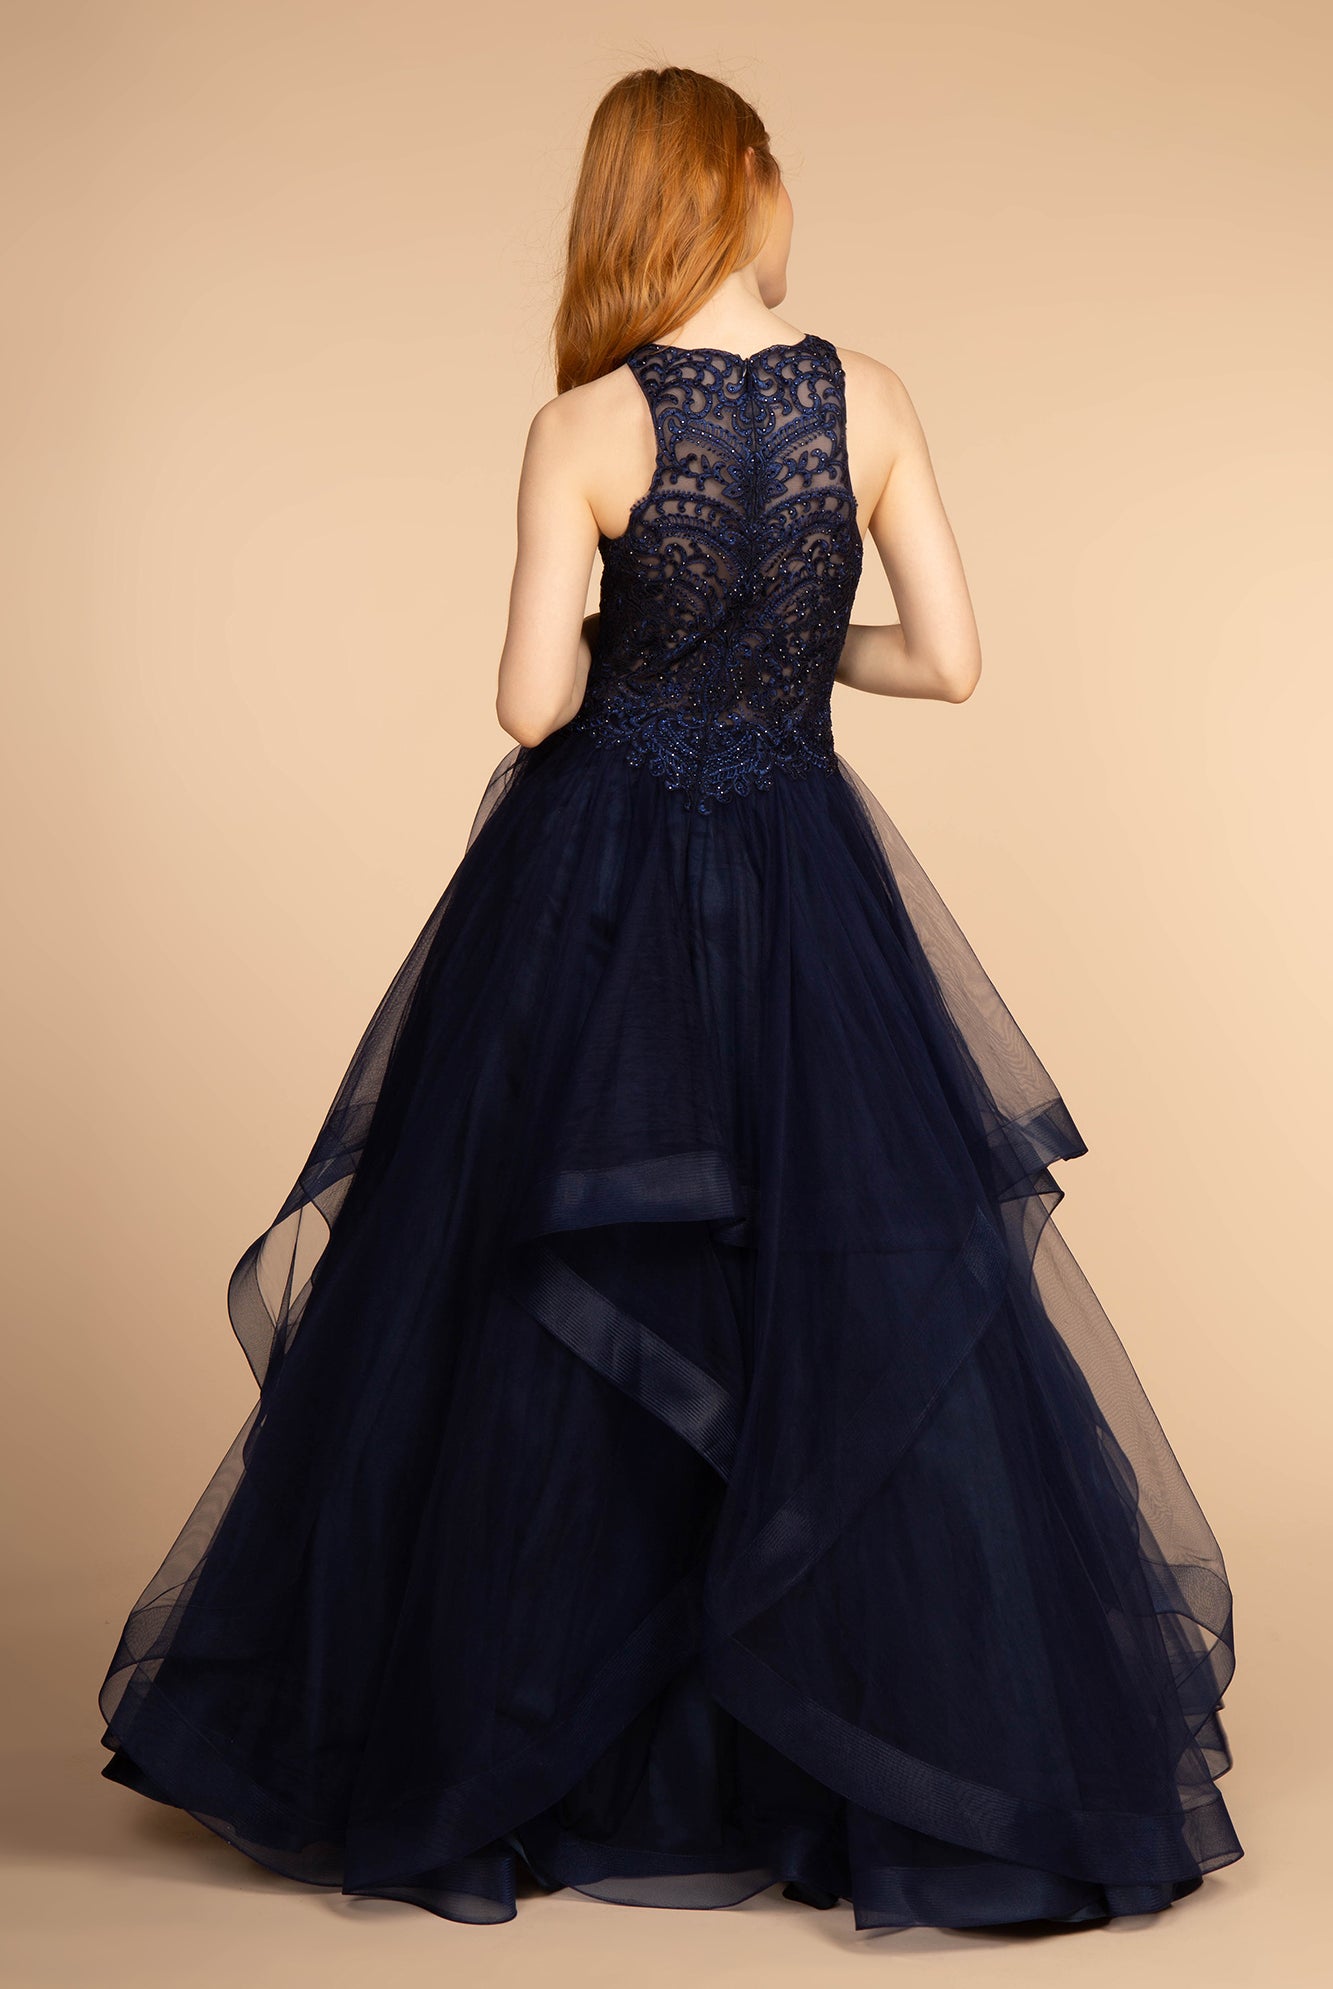 Embroidered Applique Bodice Tulle Long Dress-smcdress